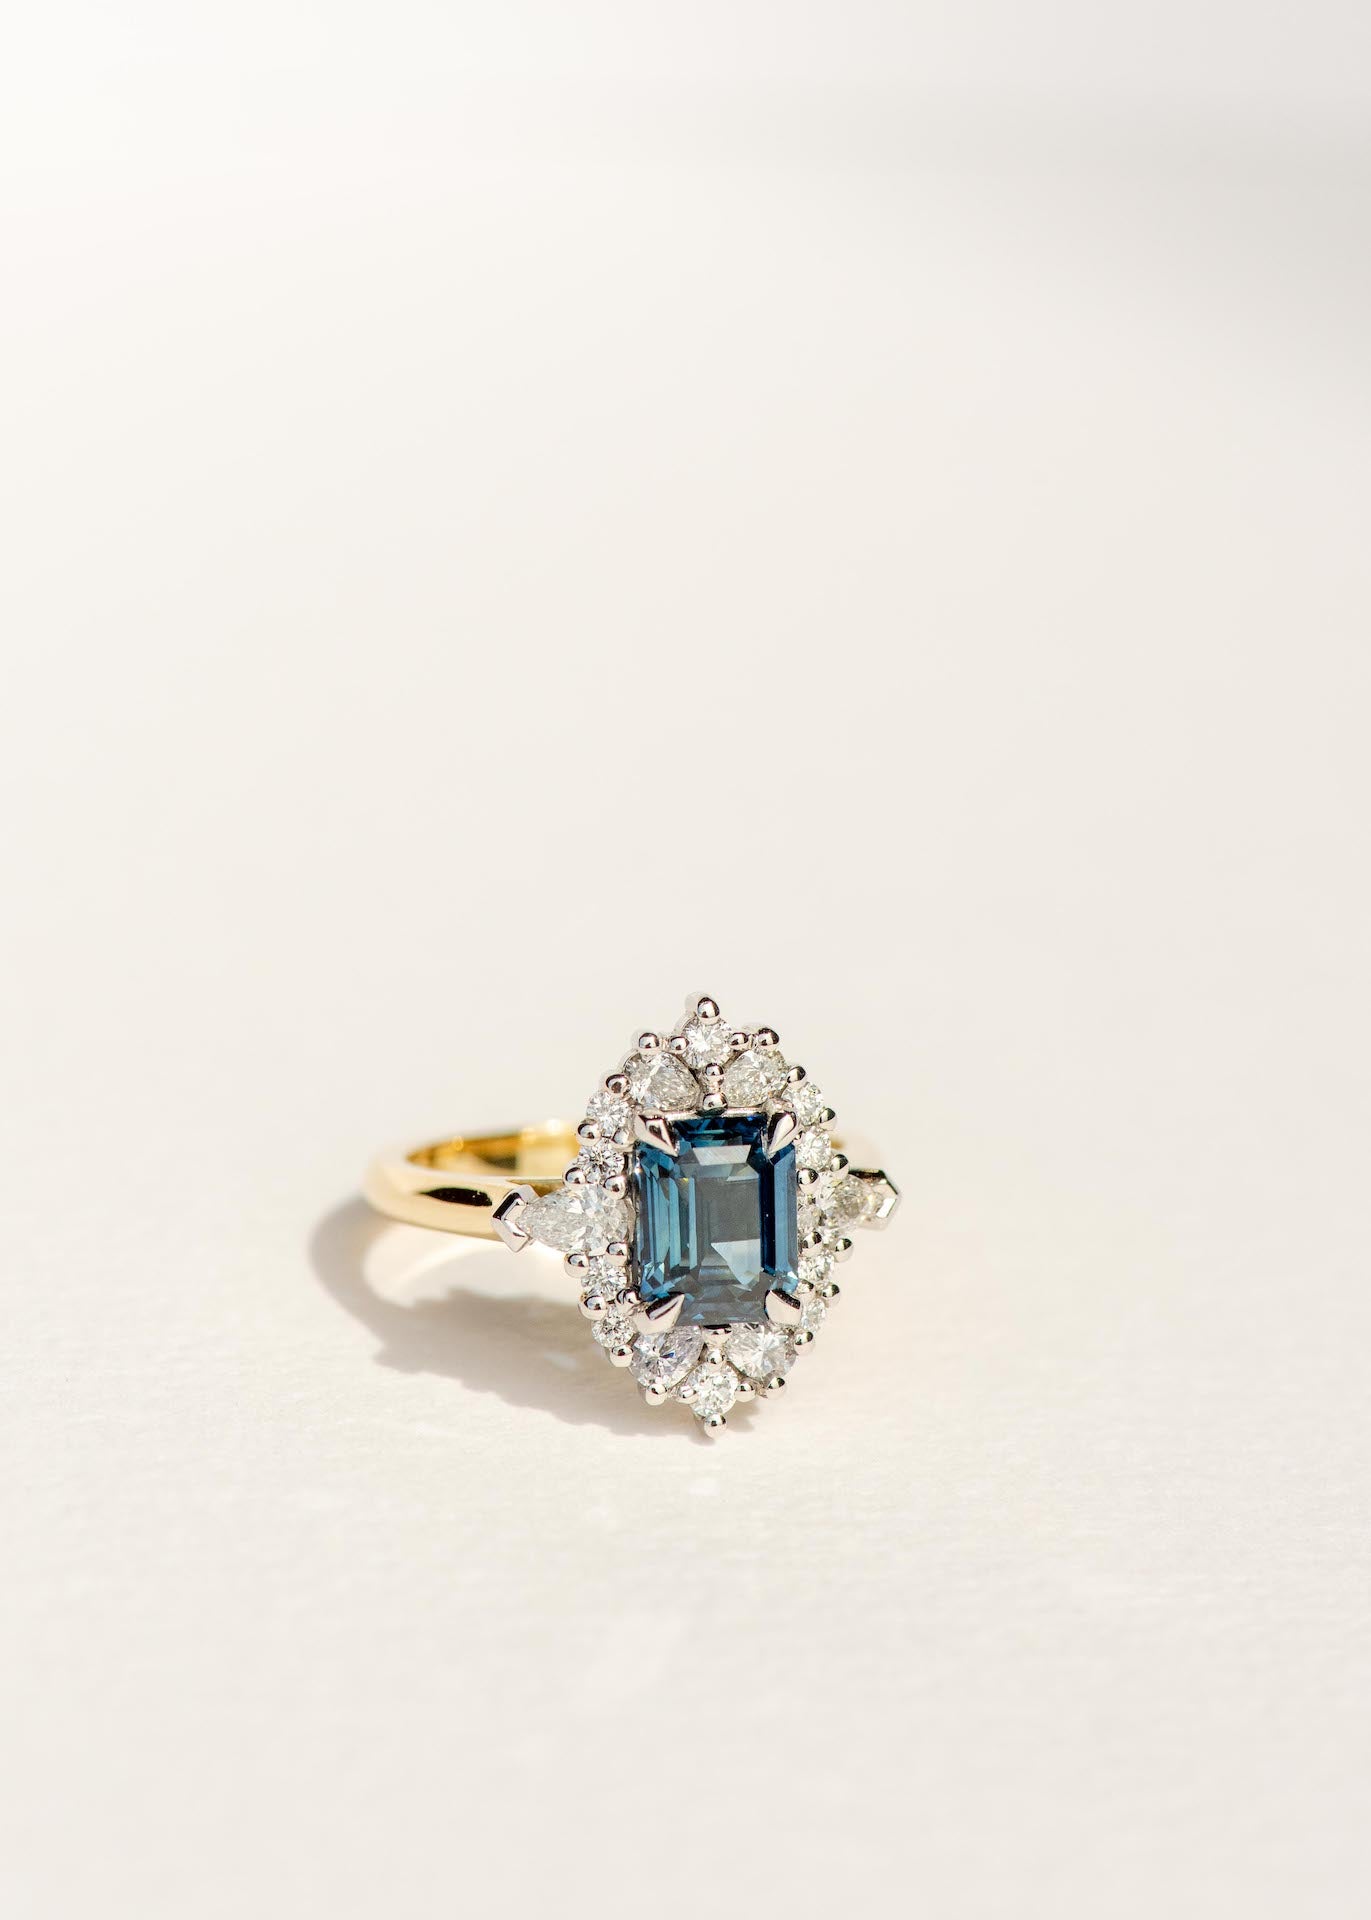 Dean & Dust - Bespoke Design - Teal Sapphire Engagement Ring with Diamond Halo - Four Claw - White & Yellow Gold Setting